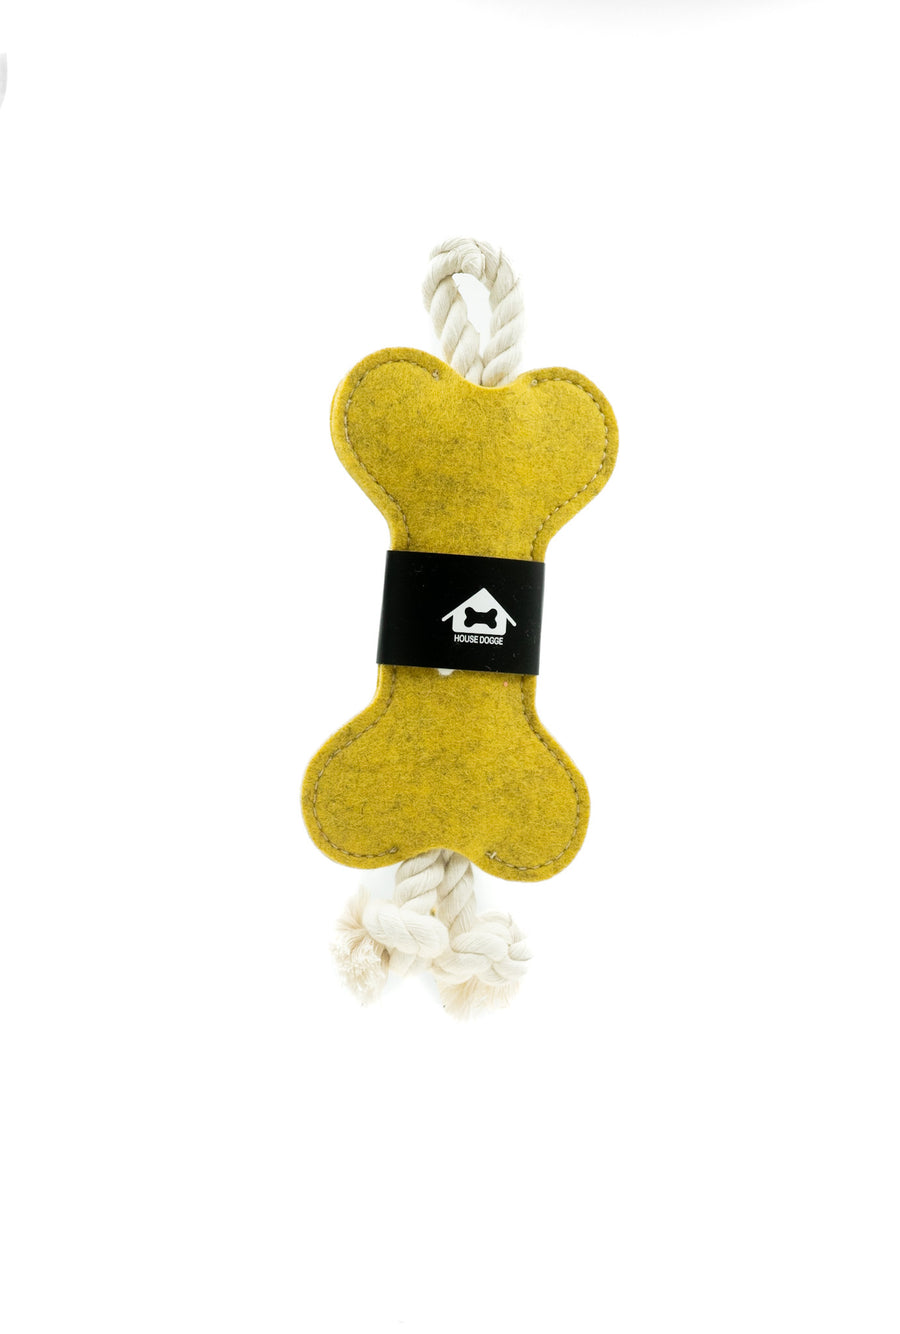 Binky Toy by House Dogge